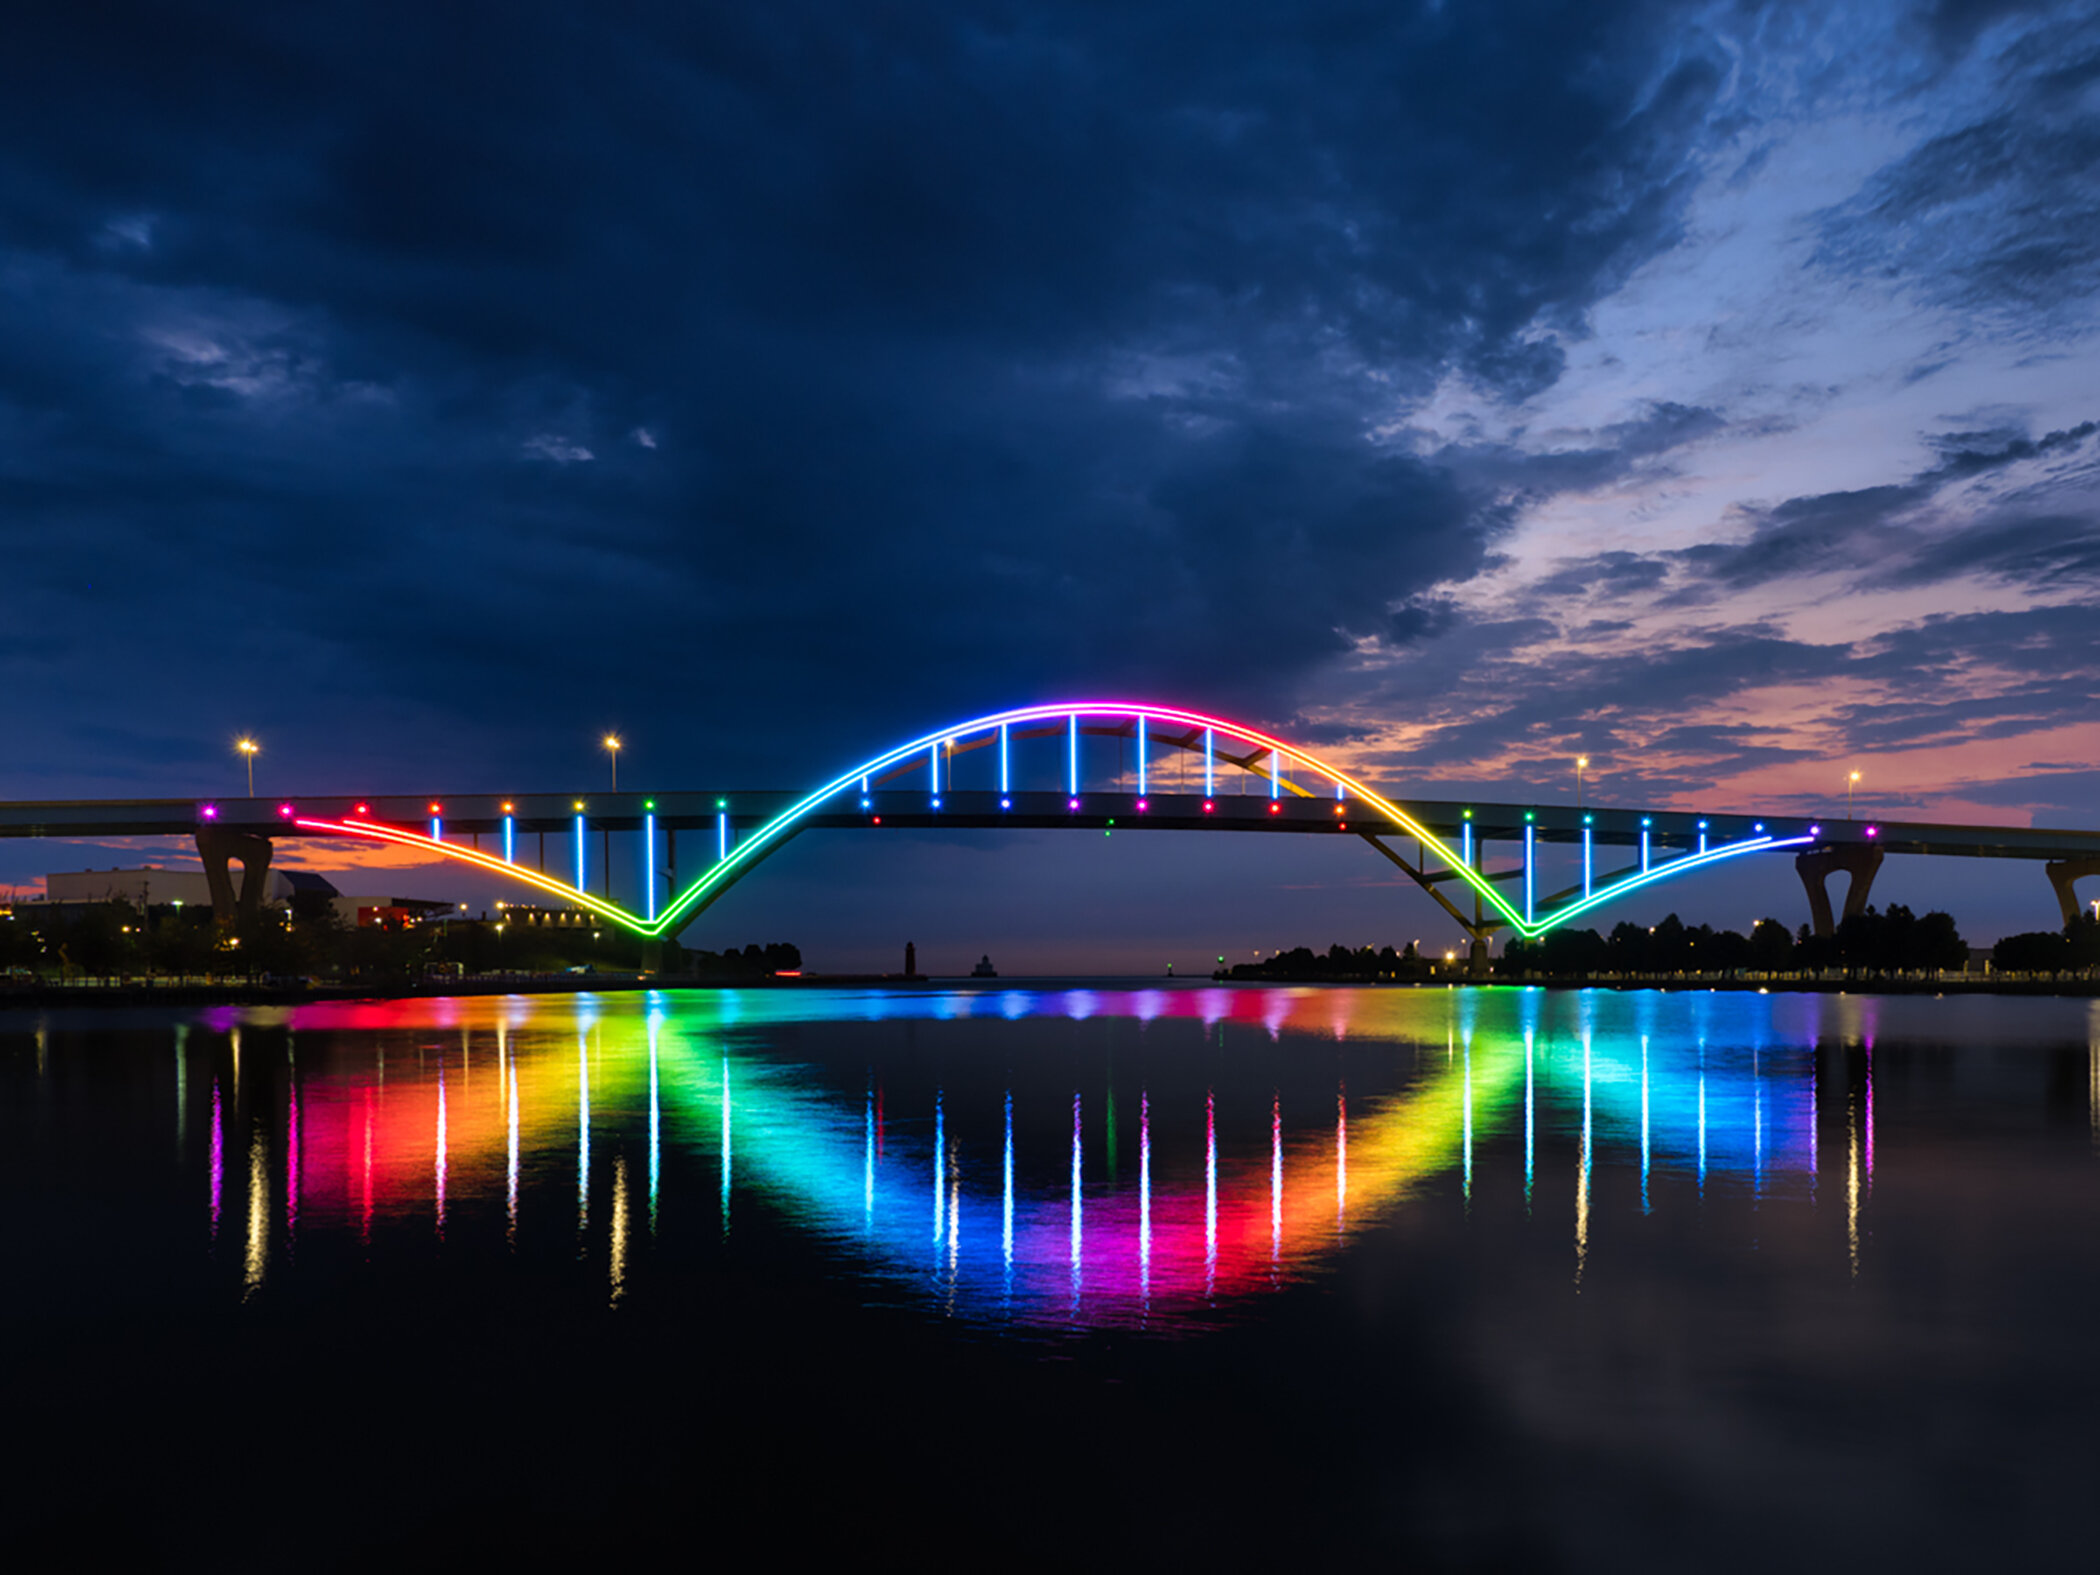 Open 2nd place - Light on the Hoan - Kristine HInrichs